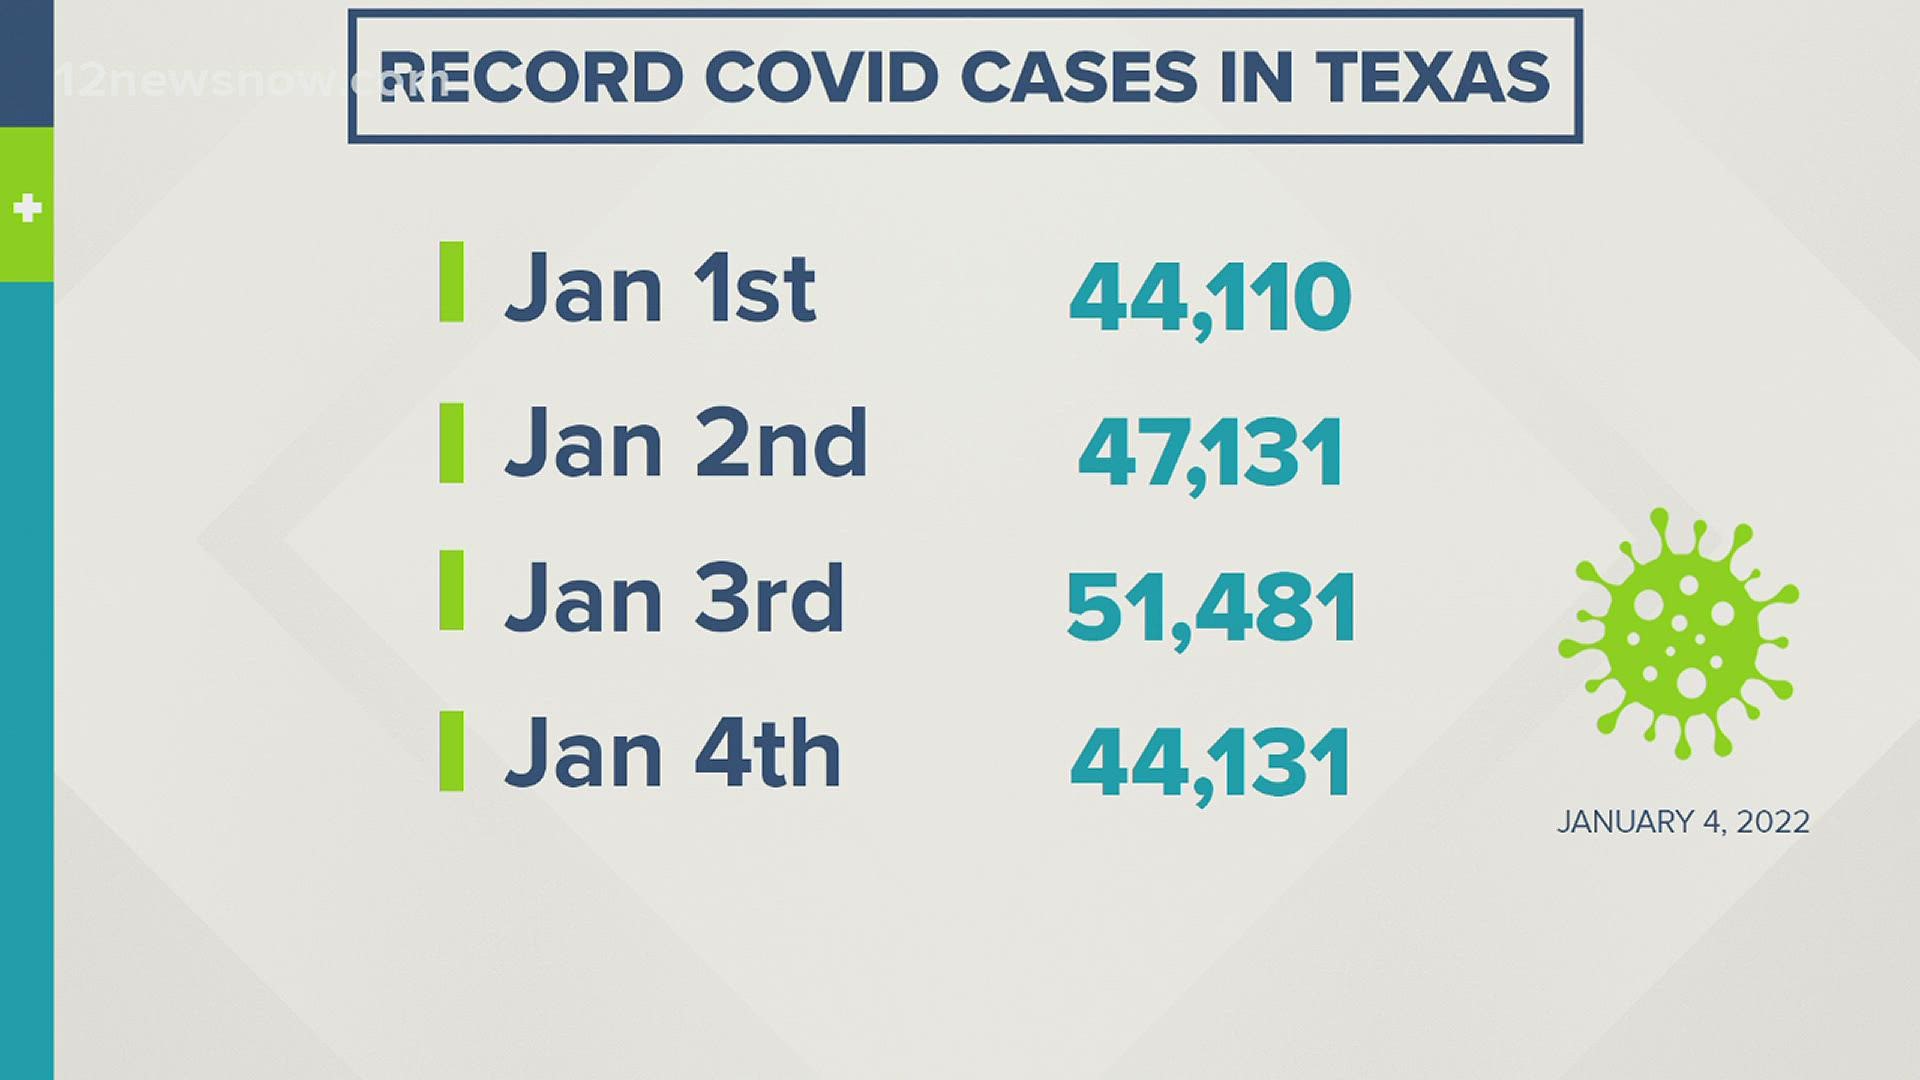 Texas has broken daily COVID-19 records as of the new year.